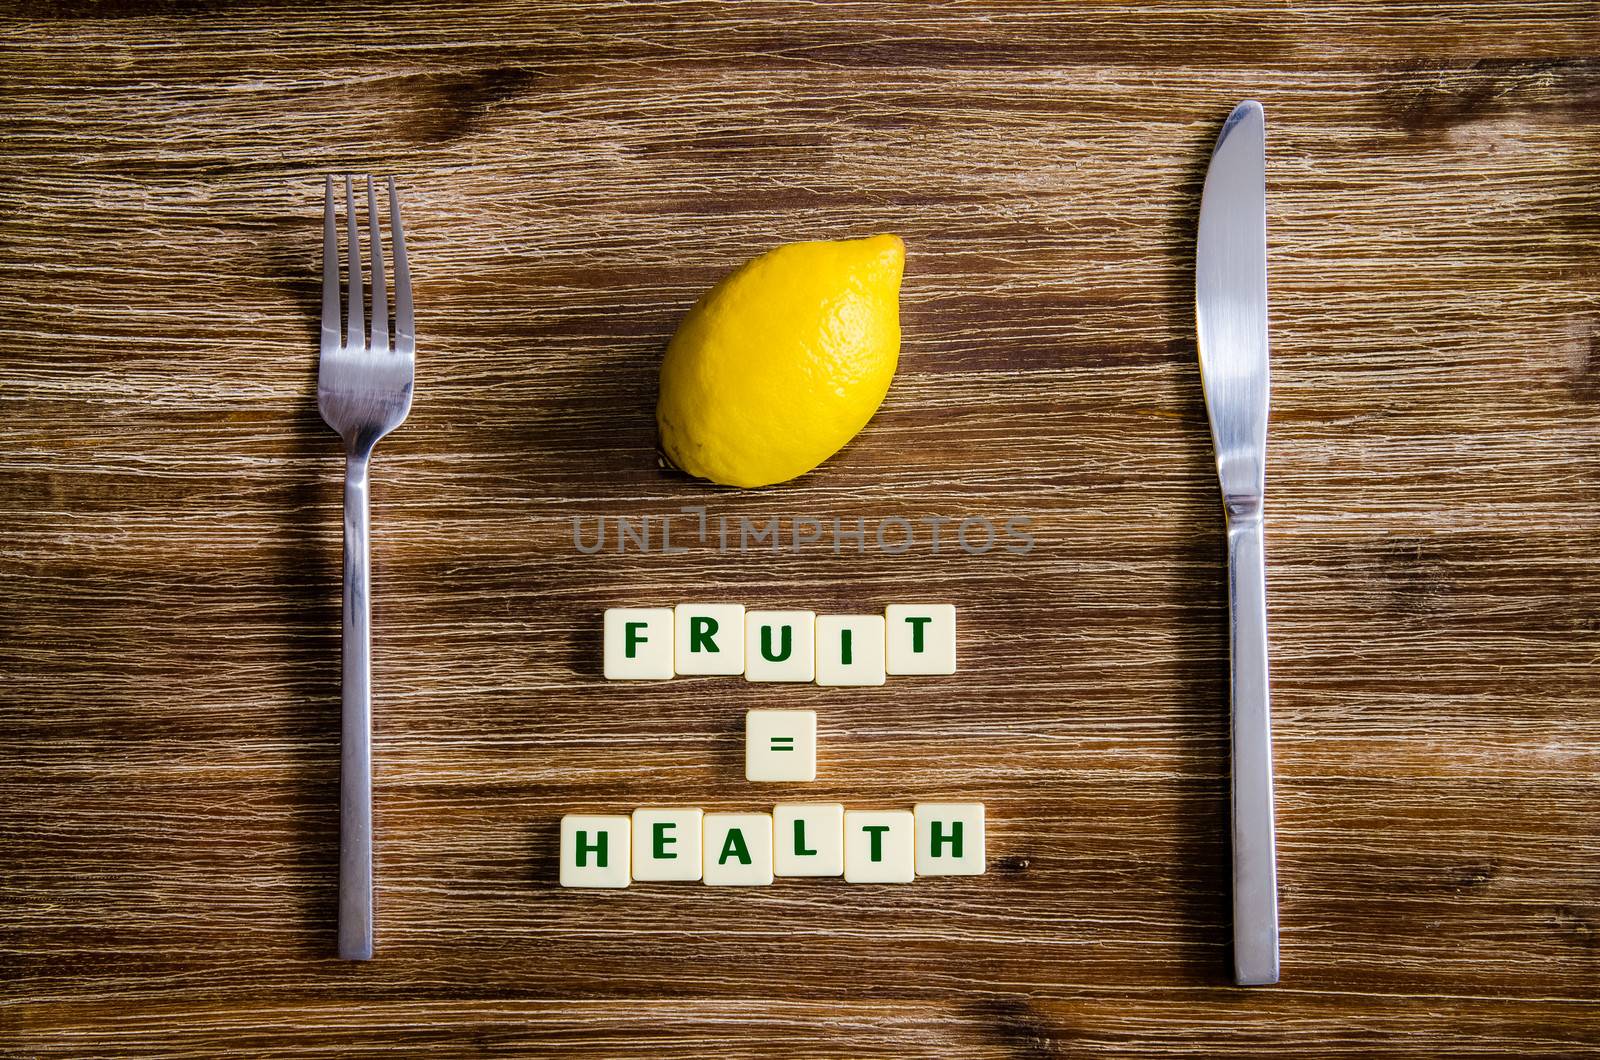 Silverware and lemon set on table with healthy sign by martinm303